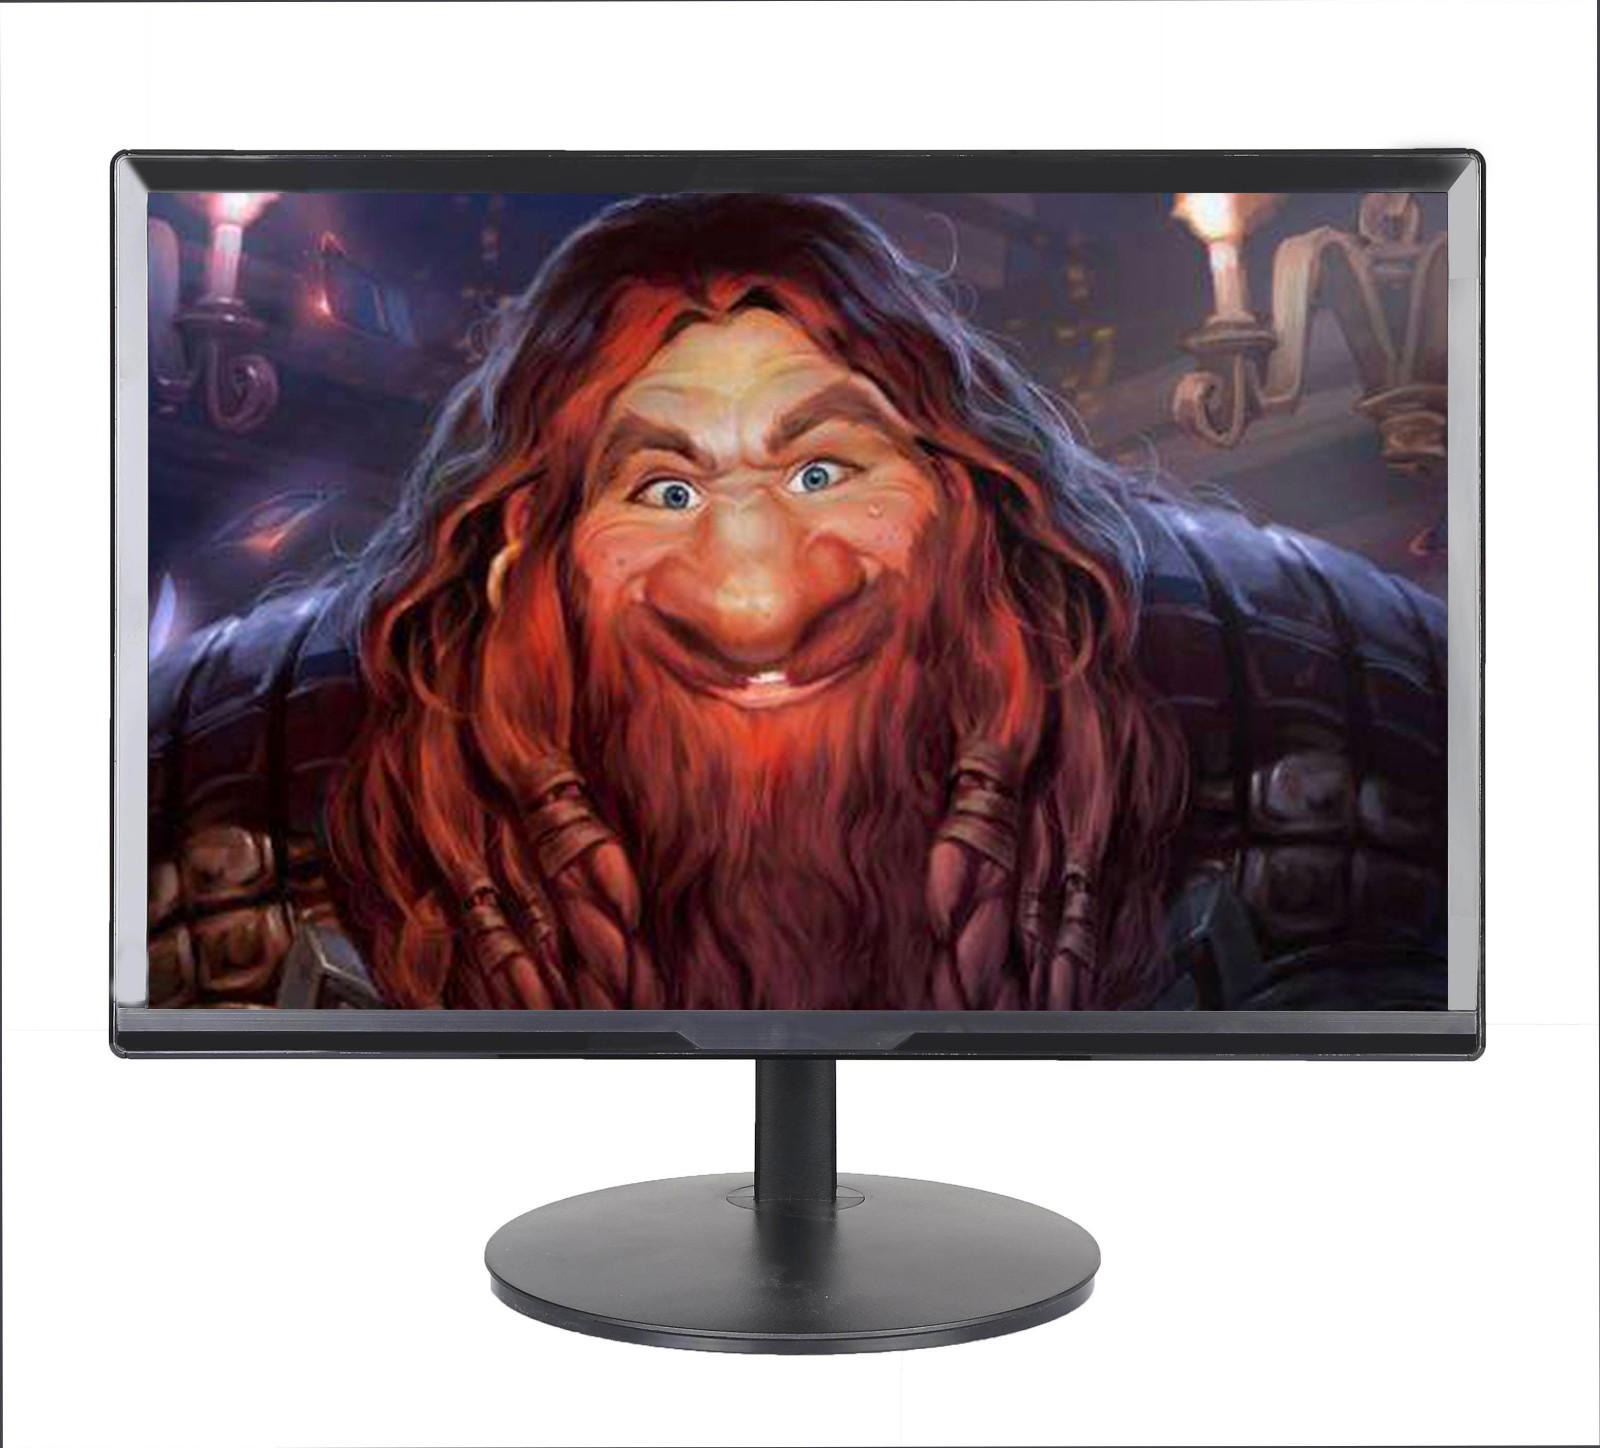 Xinyao LCD 21.5 led monitor modern design for tv screen